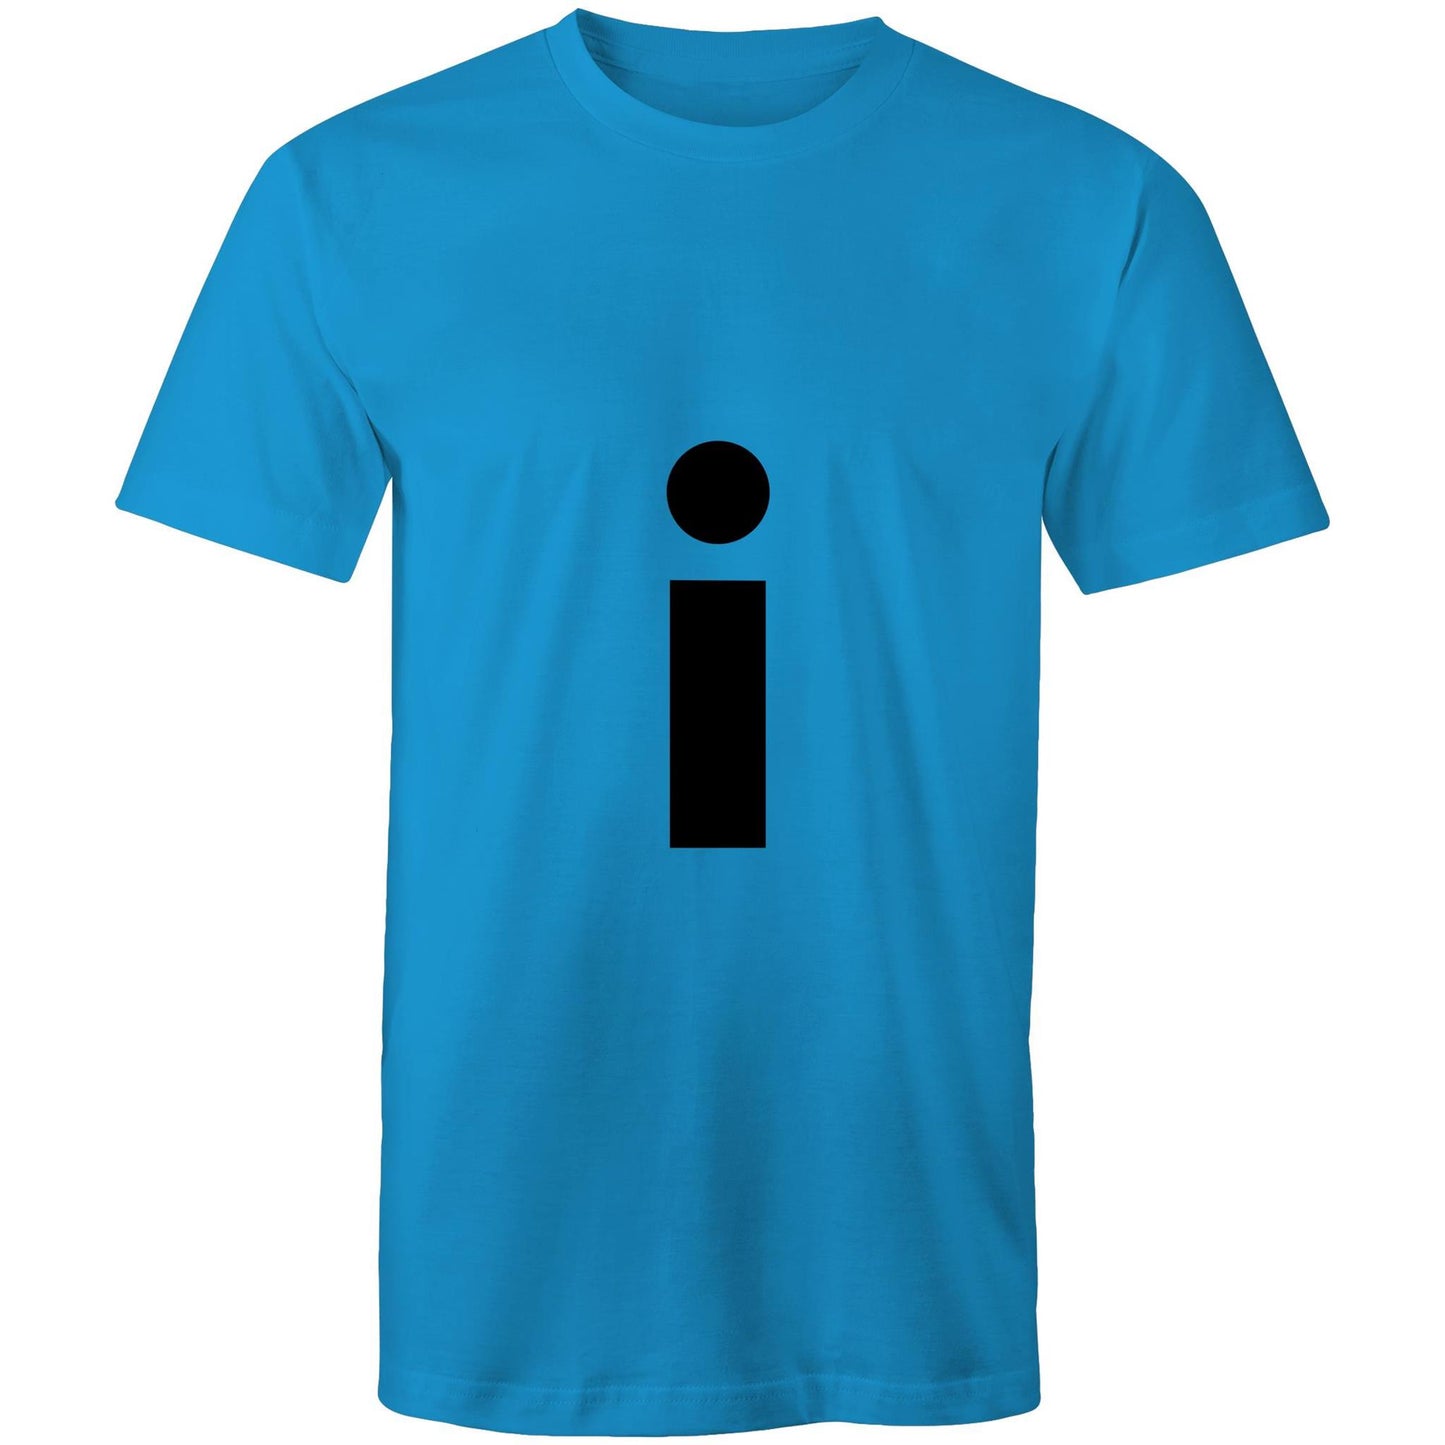 i am ifrankly i T-Shirt